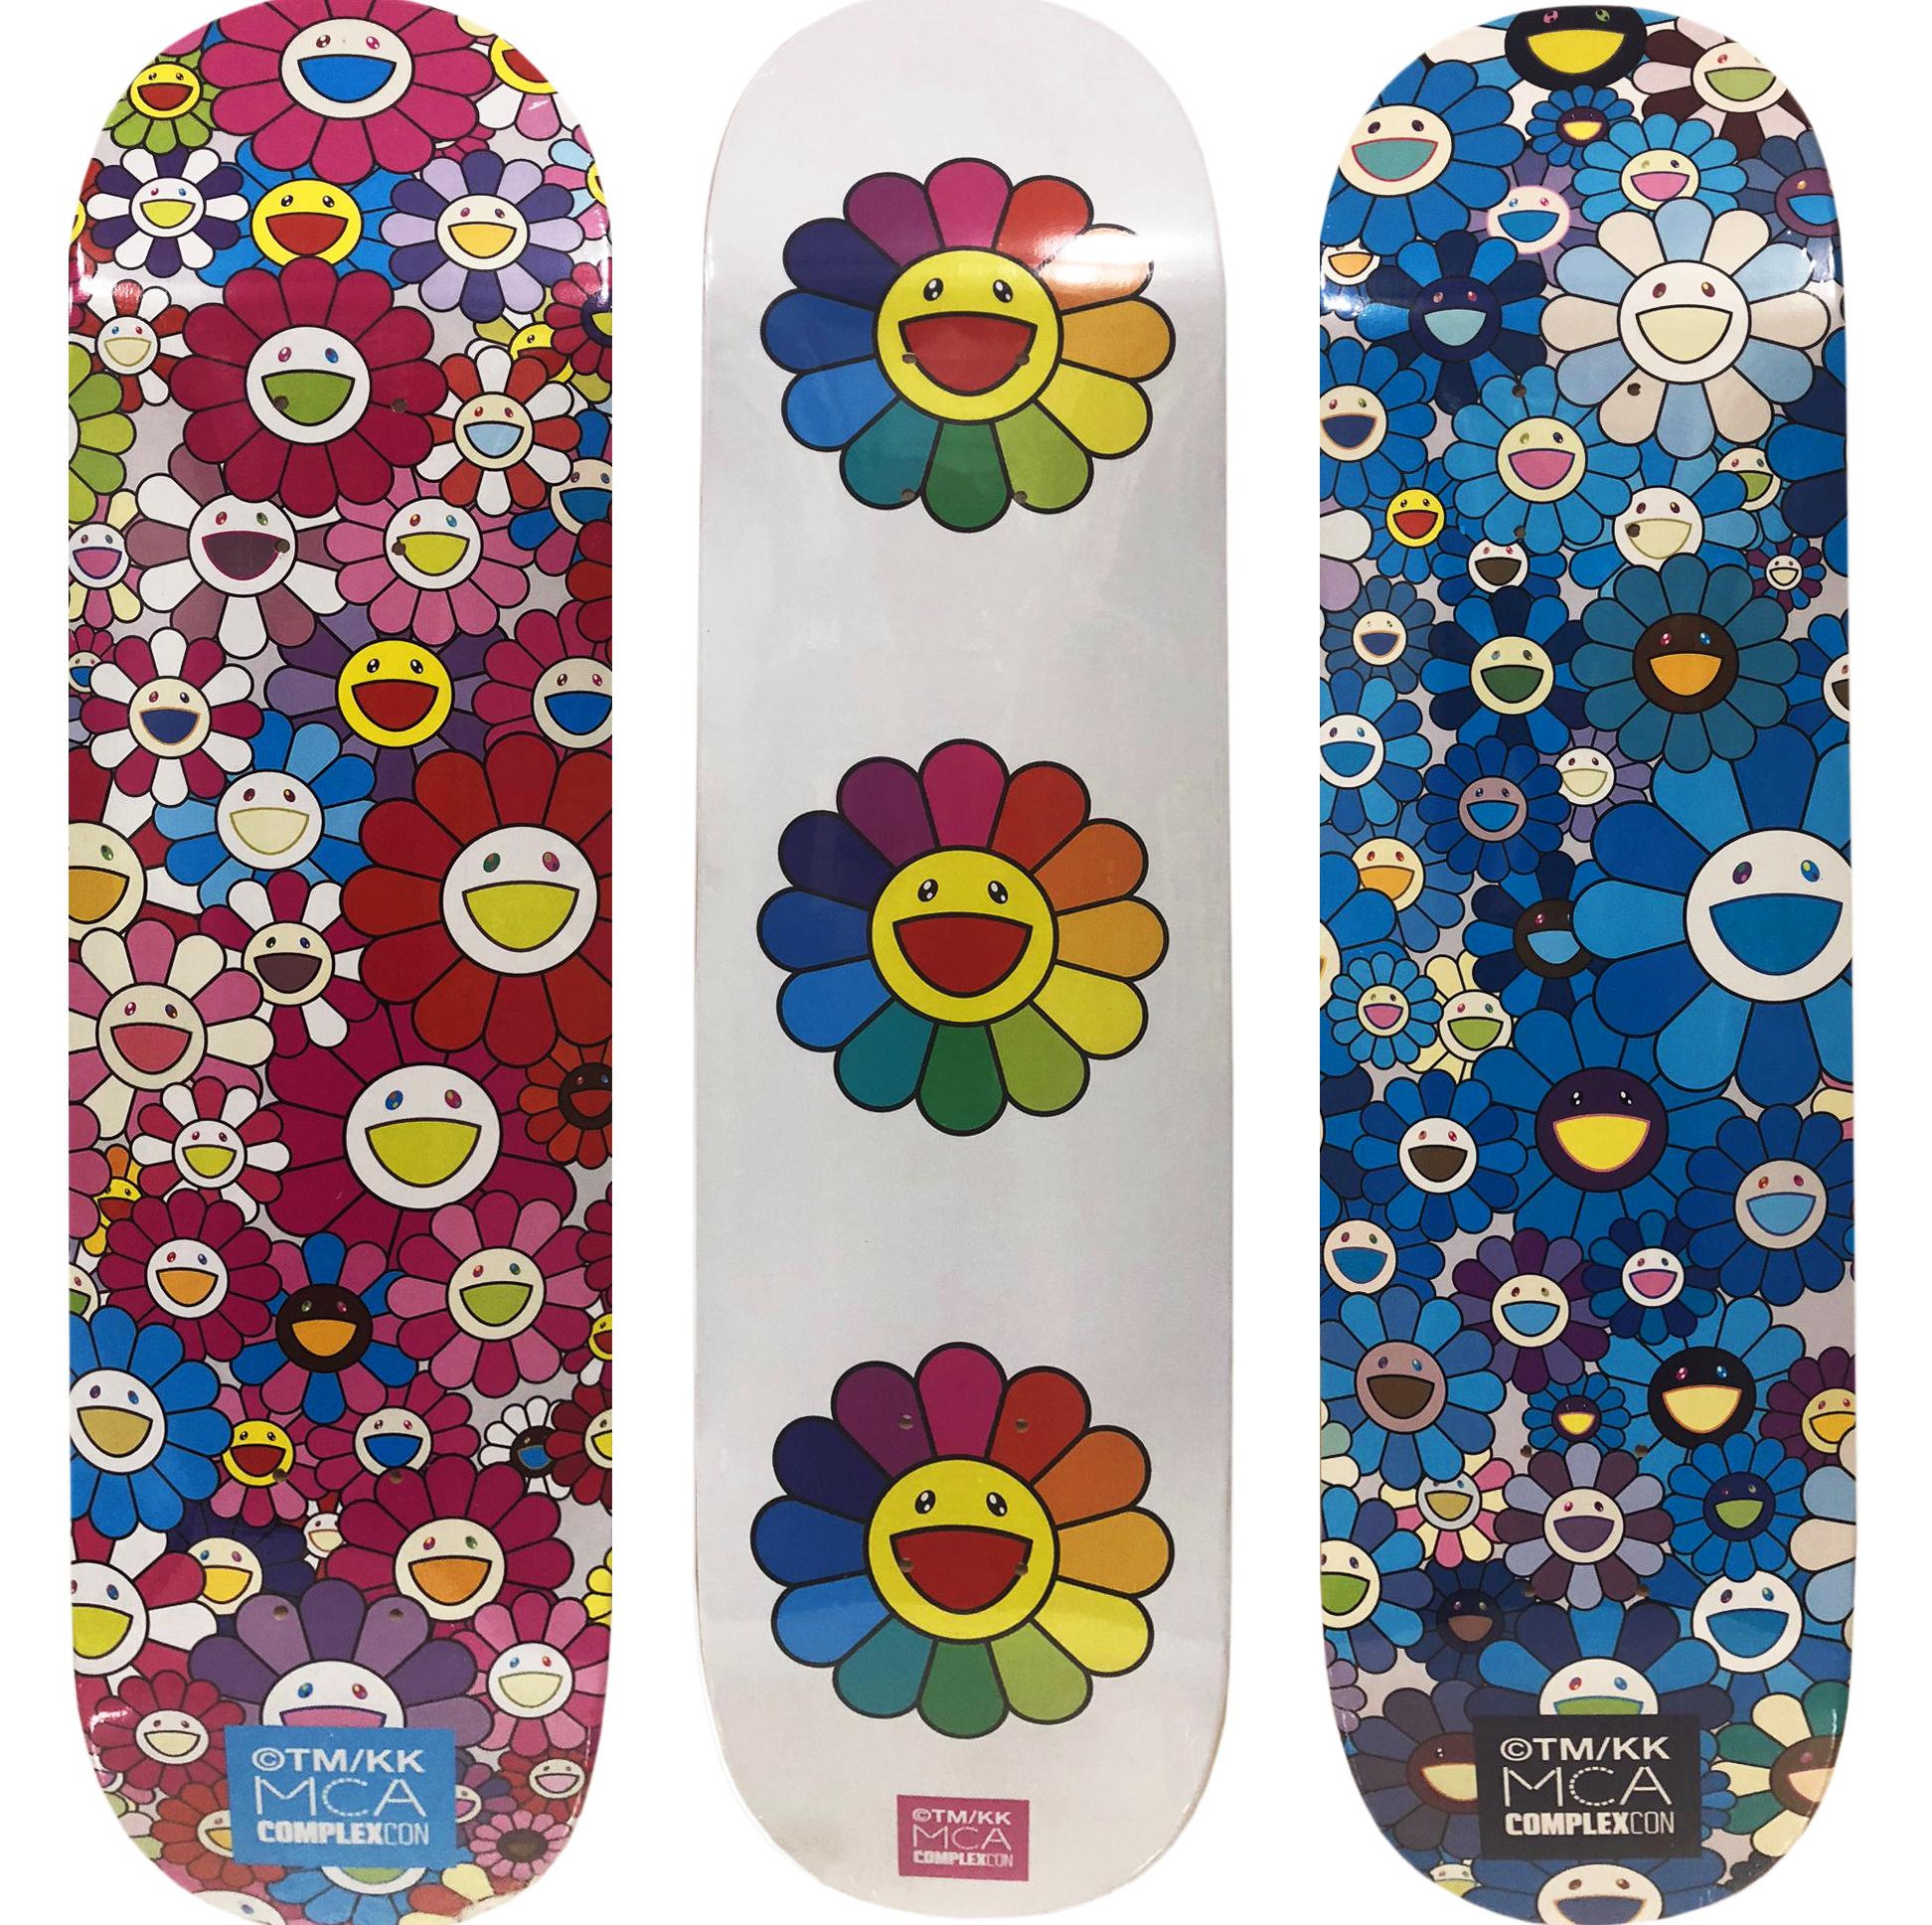 Set of 3 Takashi Murakami Flowers Skateboard Decks:
A vibrant triptych of Takashi Murakami wall art produced as a limited series in conjunction with the 2017 Murakami exhibit: The Octopus Eats Its Own Leg, MCA Chicago. A brilliant set that makes for